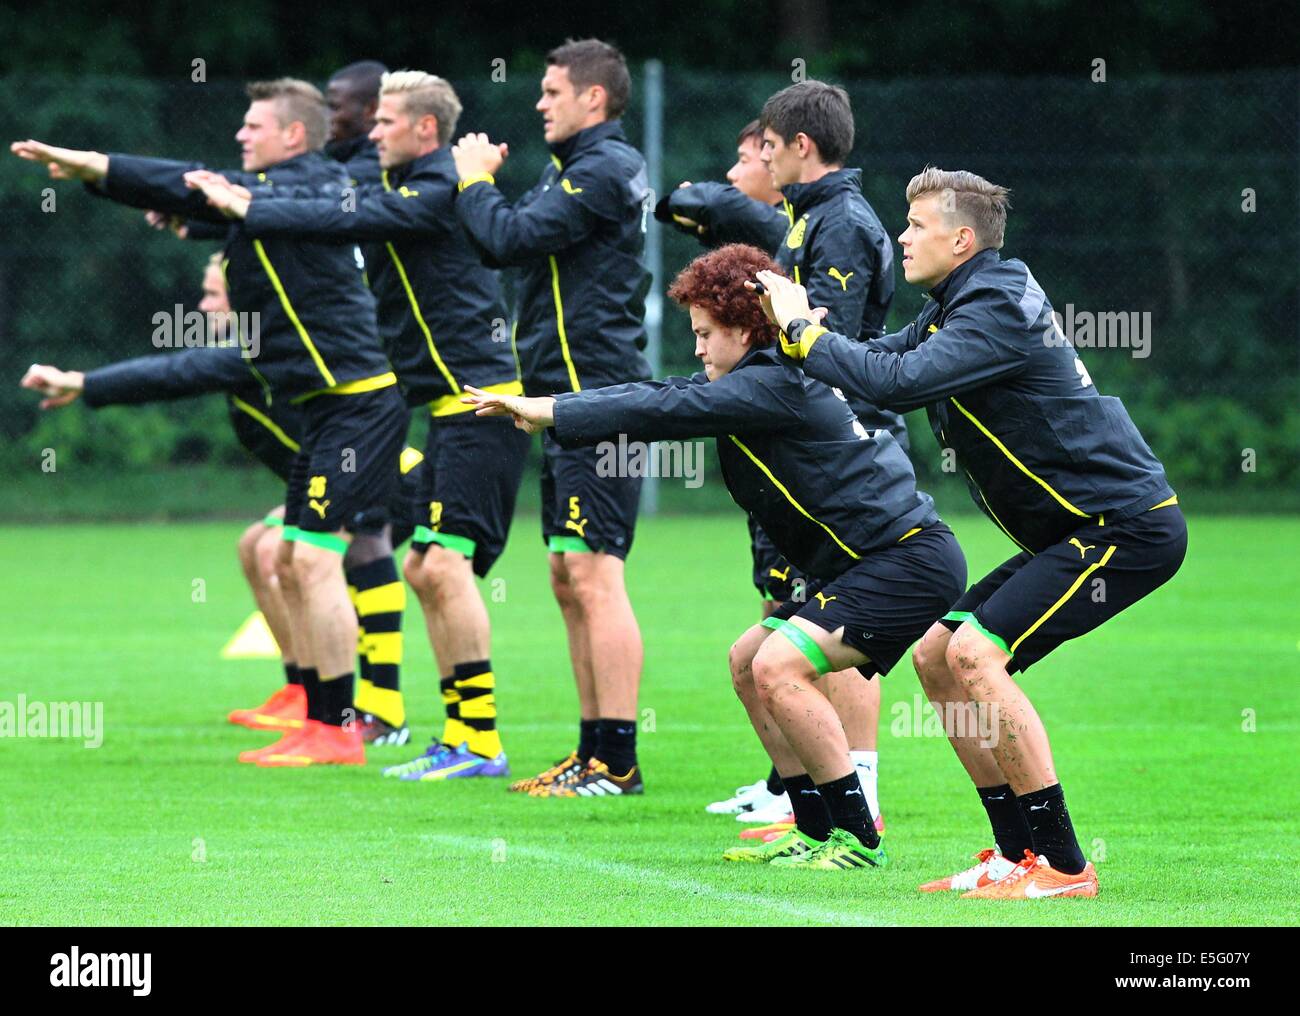 Bad Ragaz, Switzerland. 30th July, 2014. Goal keeper Mitchell Langerak (R), Mustafa Amini (3-R) and other players of Borussia Dortmund poses for photographs with fans after the training of Borussia Dortmund in Bad Ragaz, Switzerland, 30 July 2014. The Bundesliga team prepares in a training camp in Bad Ragaz for the next season until 06 August 2014. Photo: Karl-Josef Hildenbrand/dpa/Alamy Live News Stock Photo